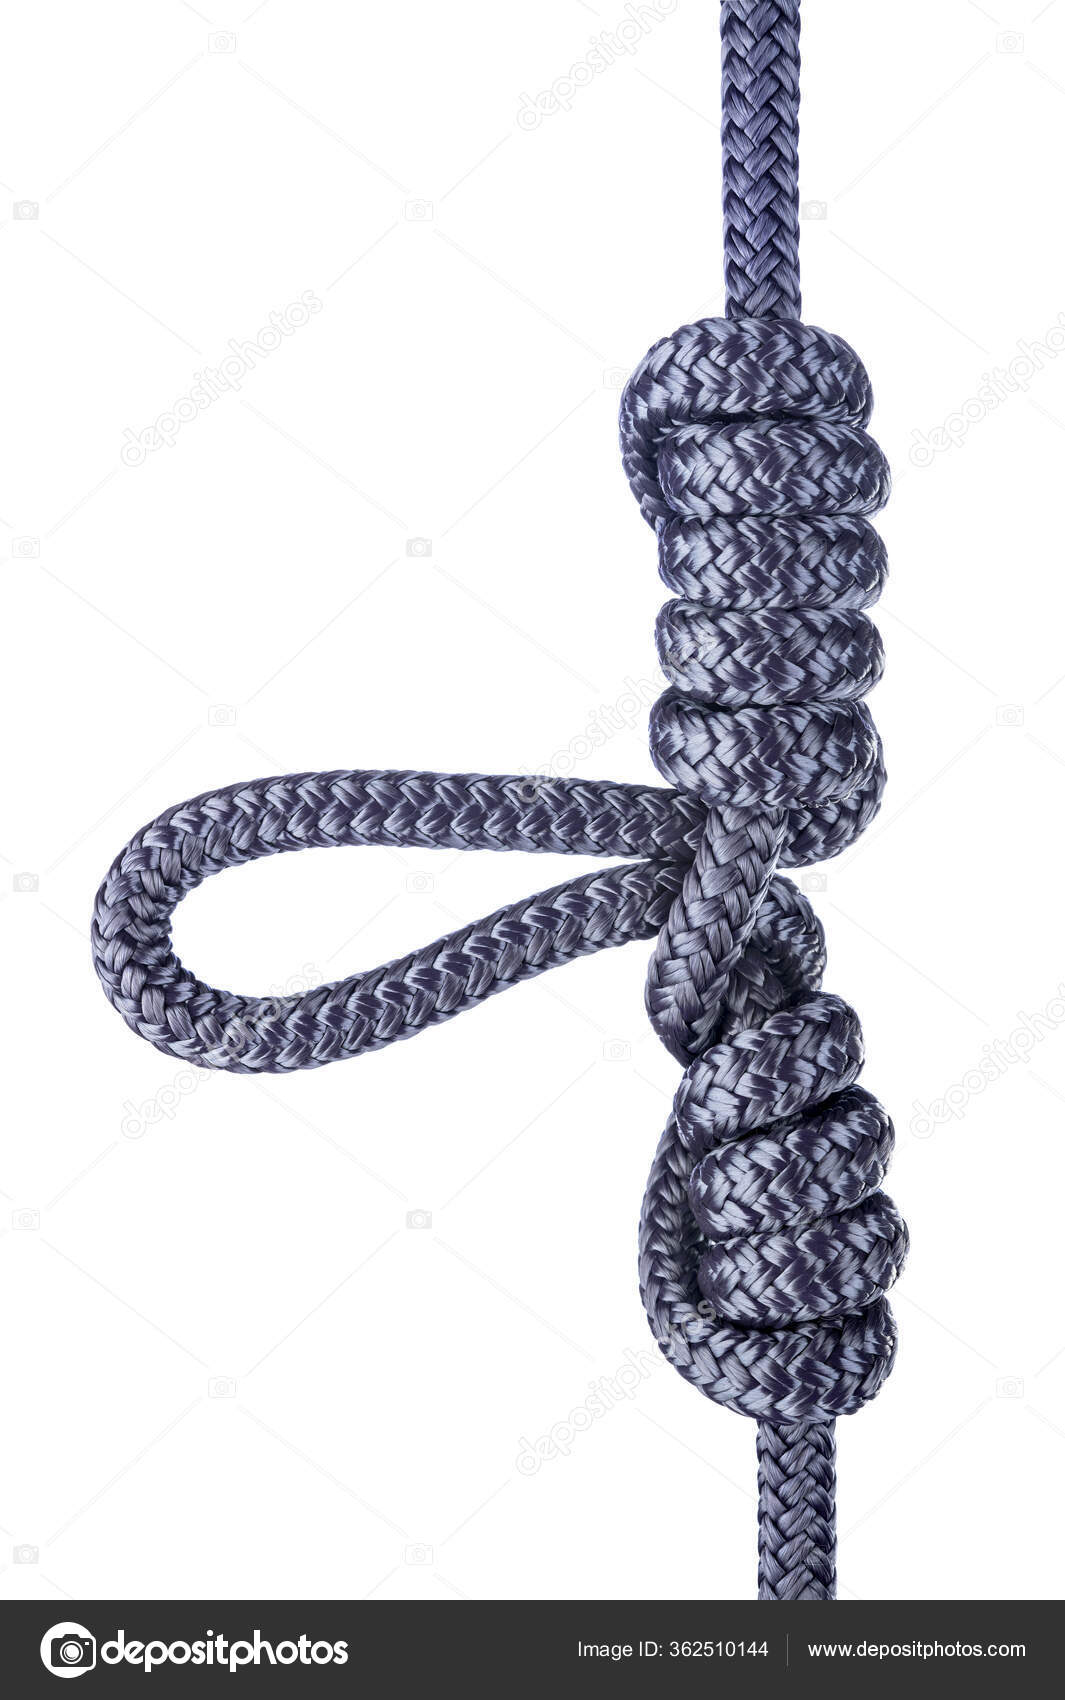 Dropper Loop Knot Creates Loop Stands Out Right Angles Middle — Stock Photo  © kelpfish #362510144